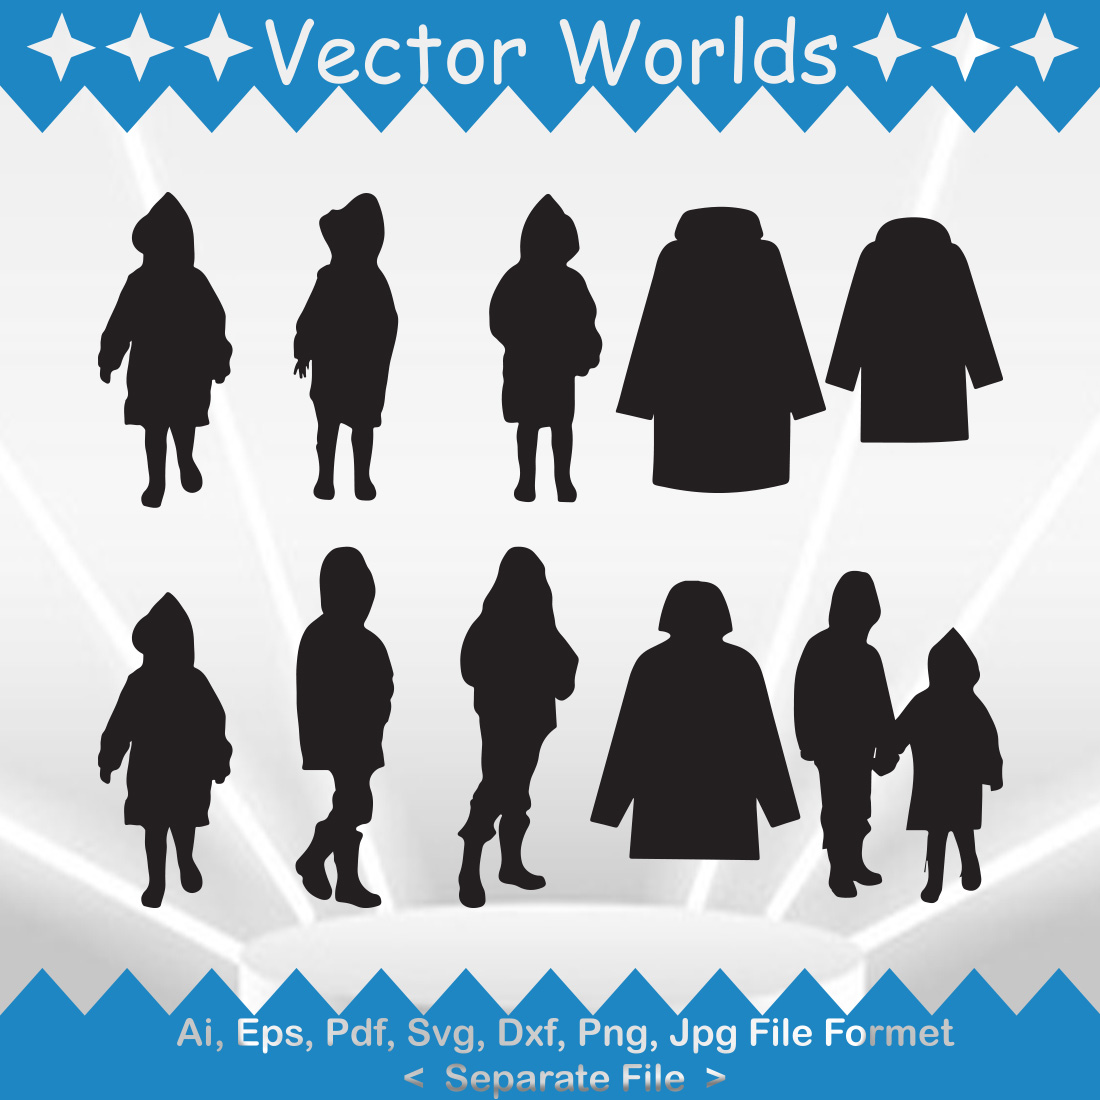 Collection of vector beautiful images of raincoats silhouettes.